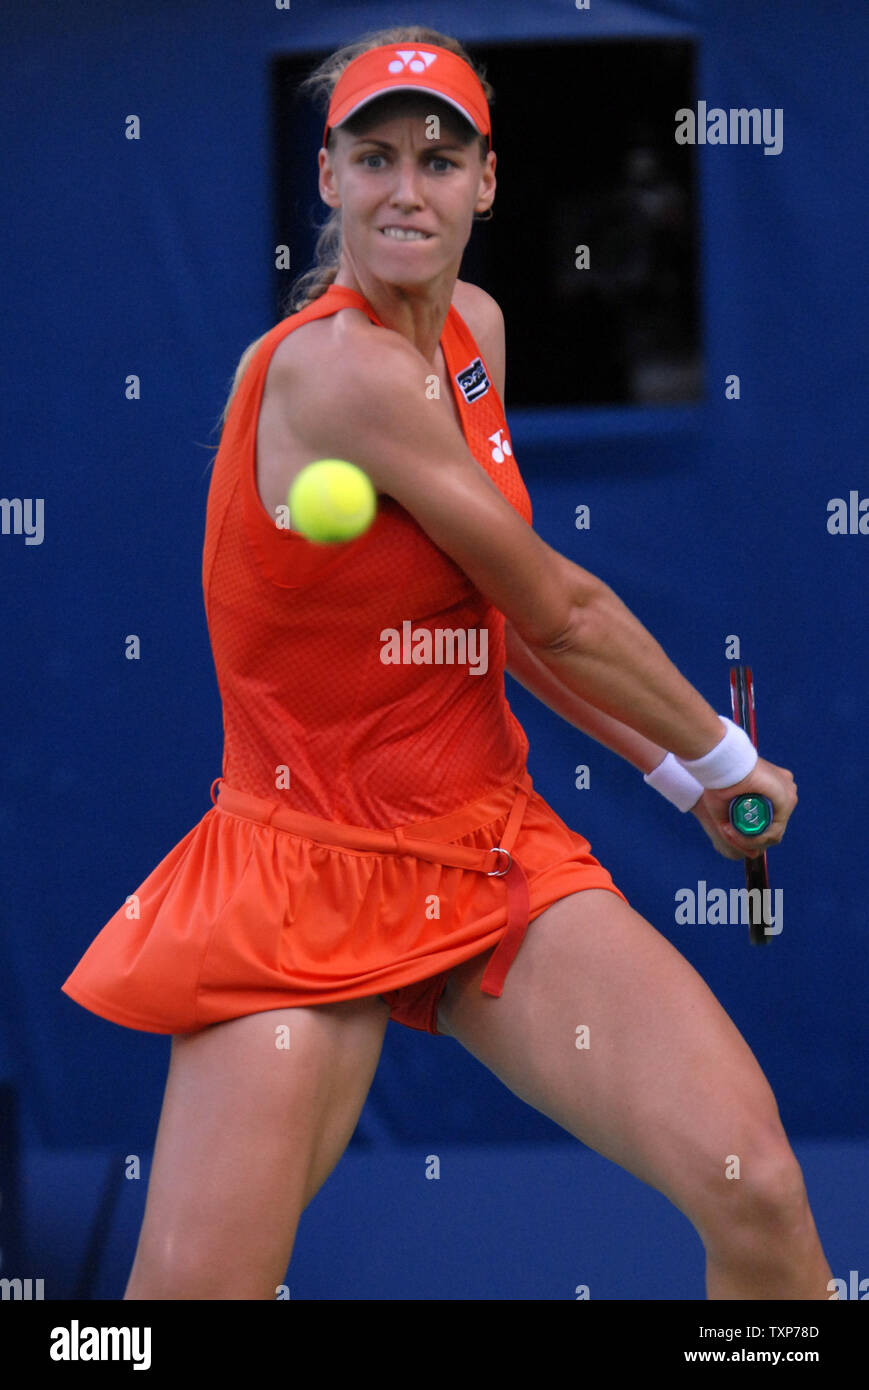 The world No. 4, Elena Dementieva from Russia returns the ball from her opponent Anabel Medina Garrigues from Spain on the fourth day of the Women's Dubai Championships,  Wednesday February 18, 2009.  (UPI Photo/Norbert Schiller) Stock Photo